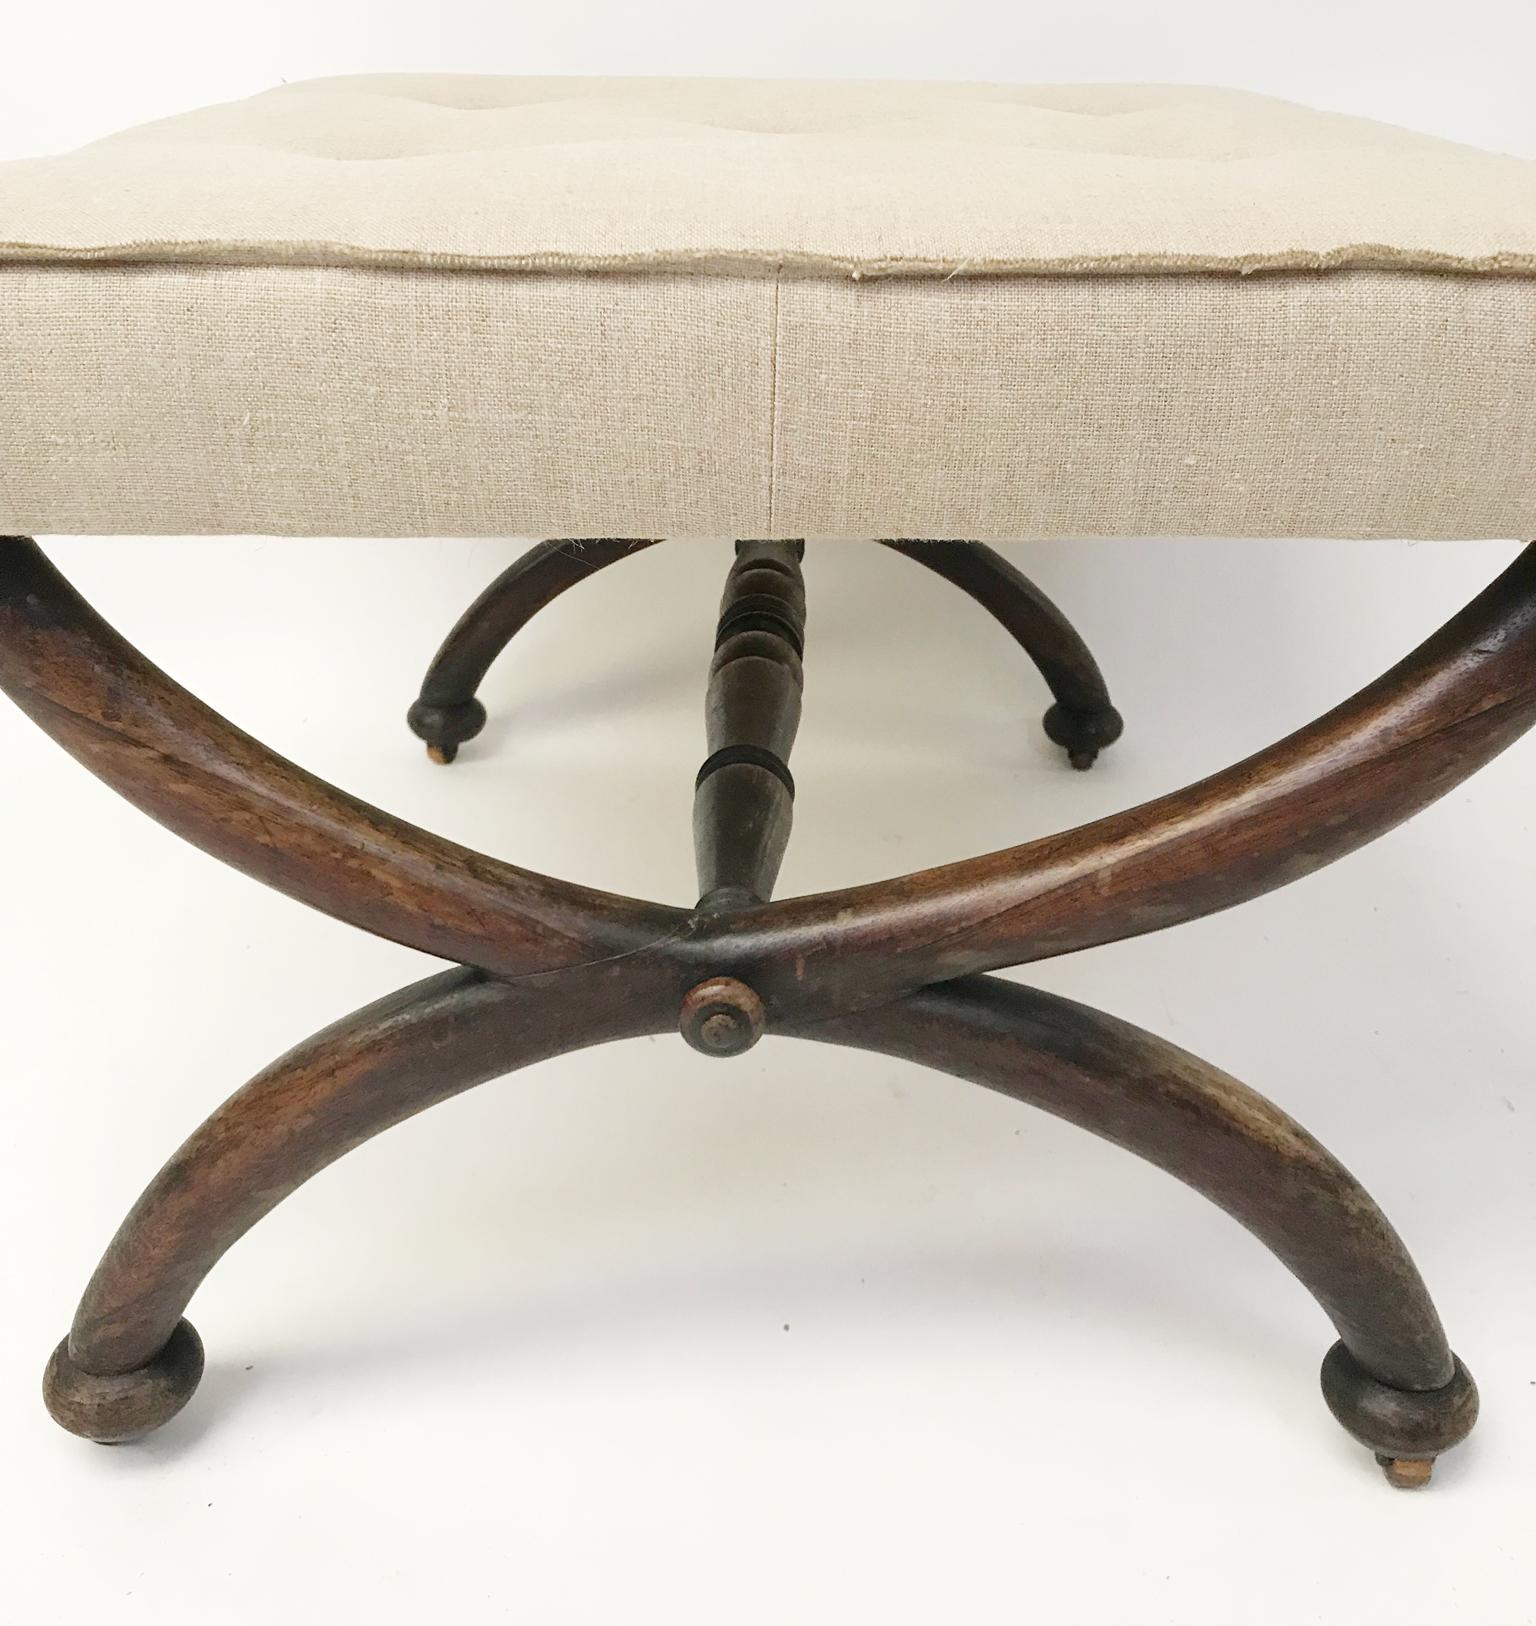 English LATE REGENCY Large Square X-Framed Stool C. 1840 Upholstered in Natural Linen